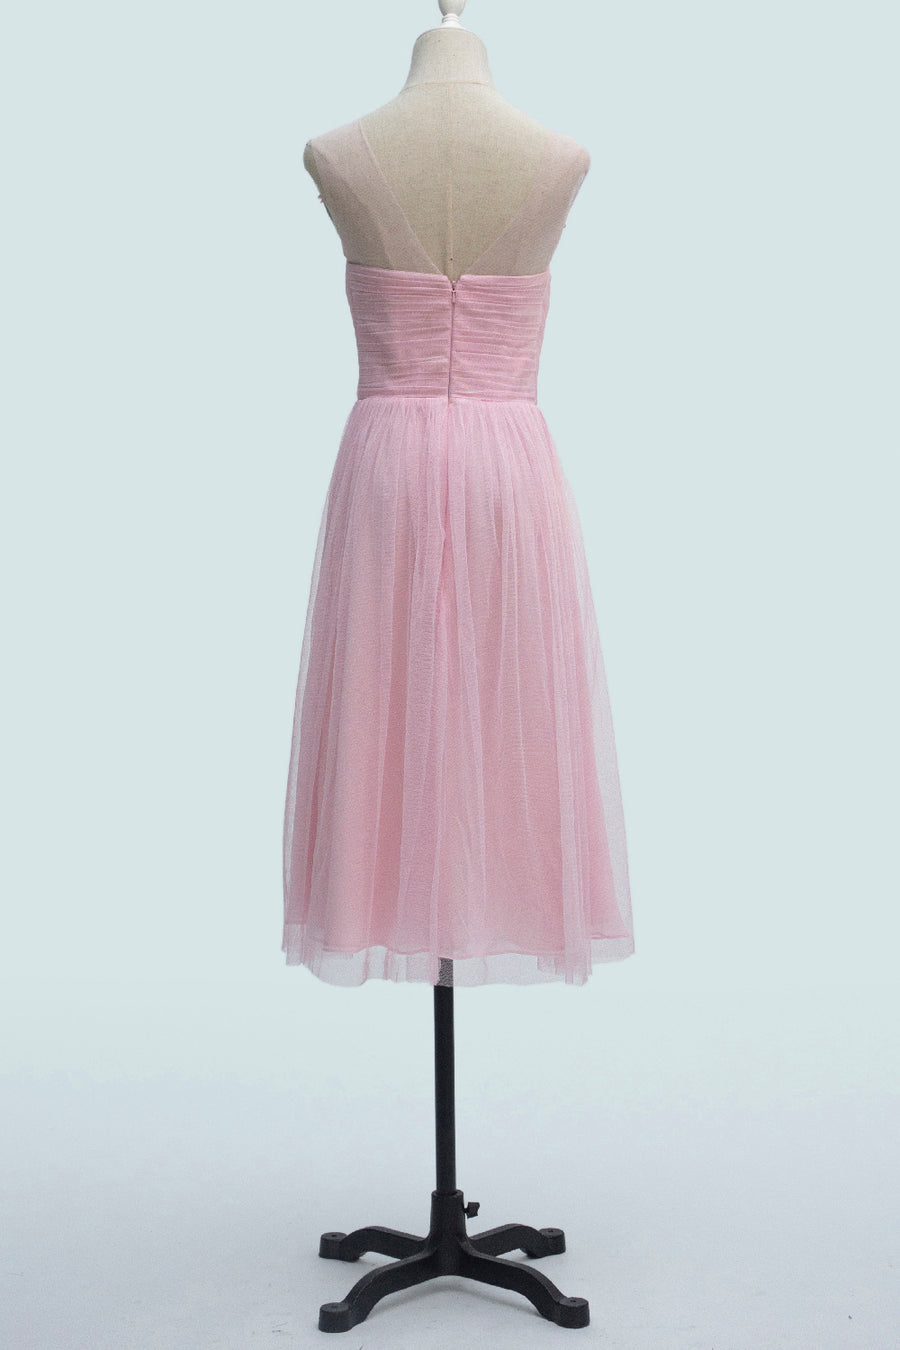 Candy Pink A-line Illusion Tulle Pleated Applique Knee Length Bridesmaid Dress